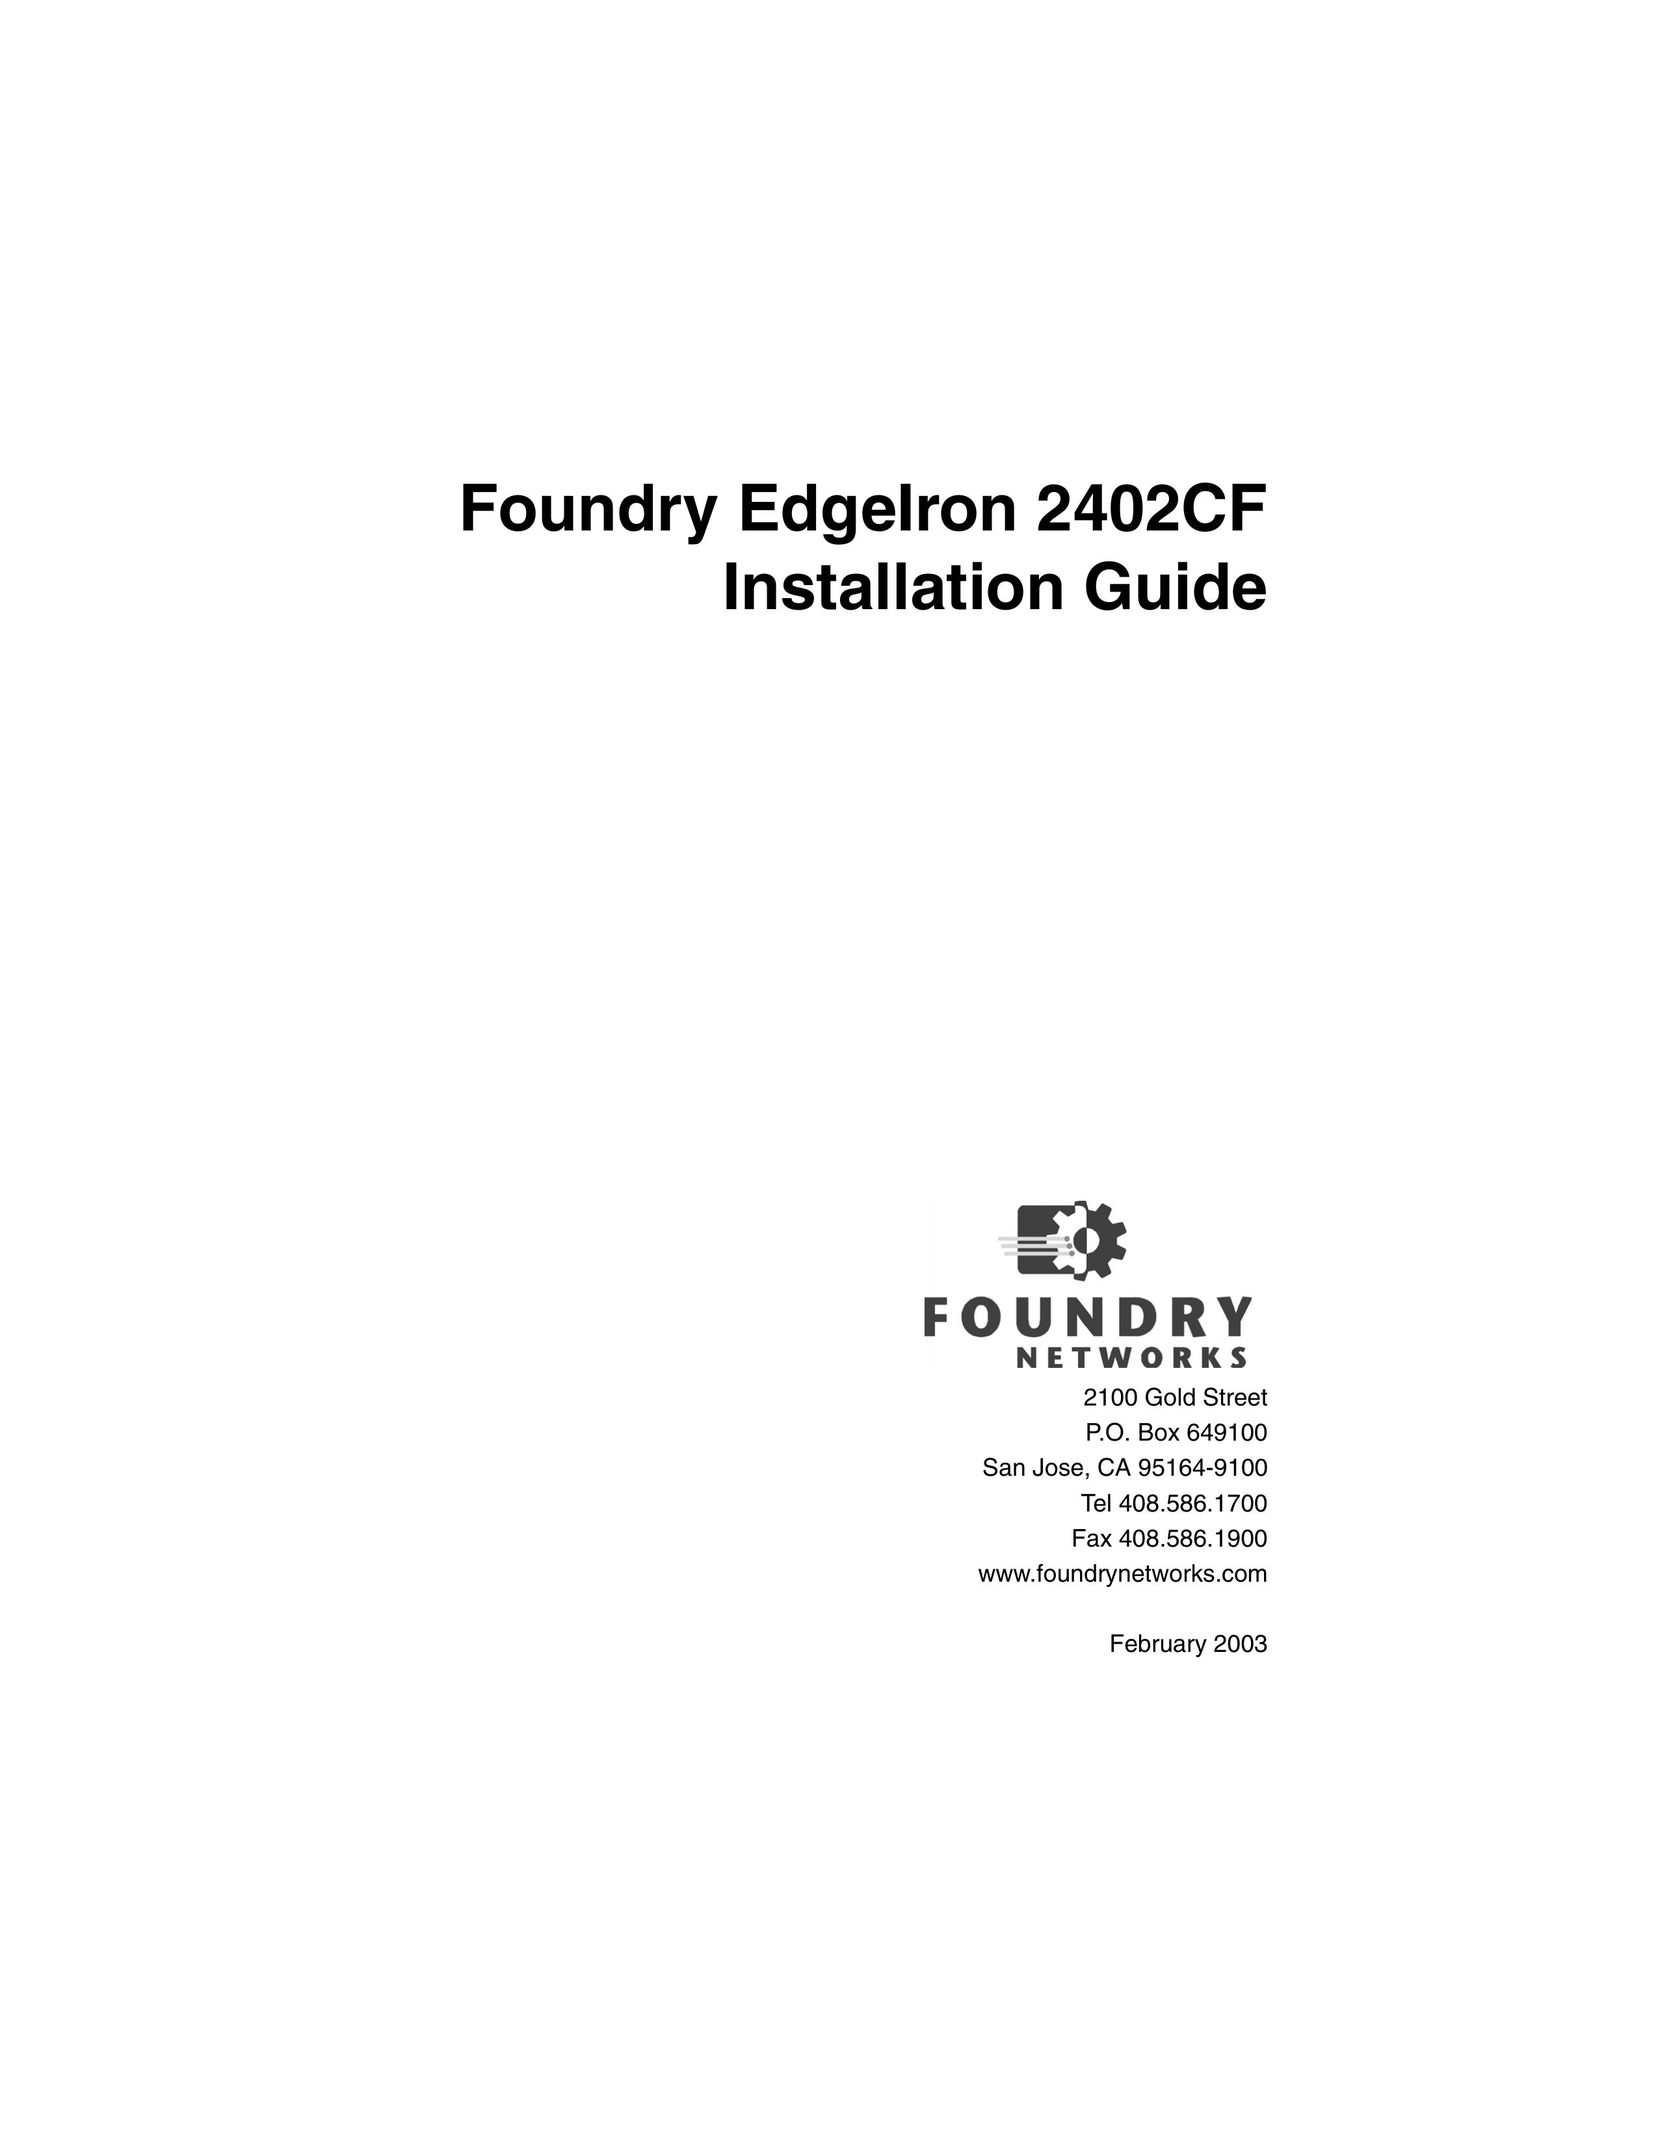 Foundry Networks 2402CF Switch User Manual